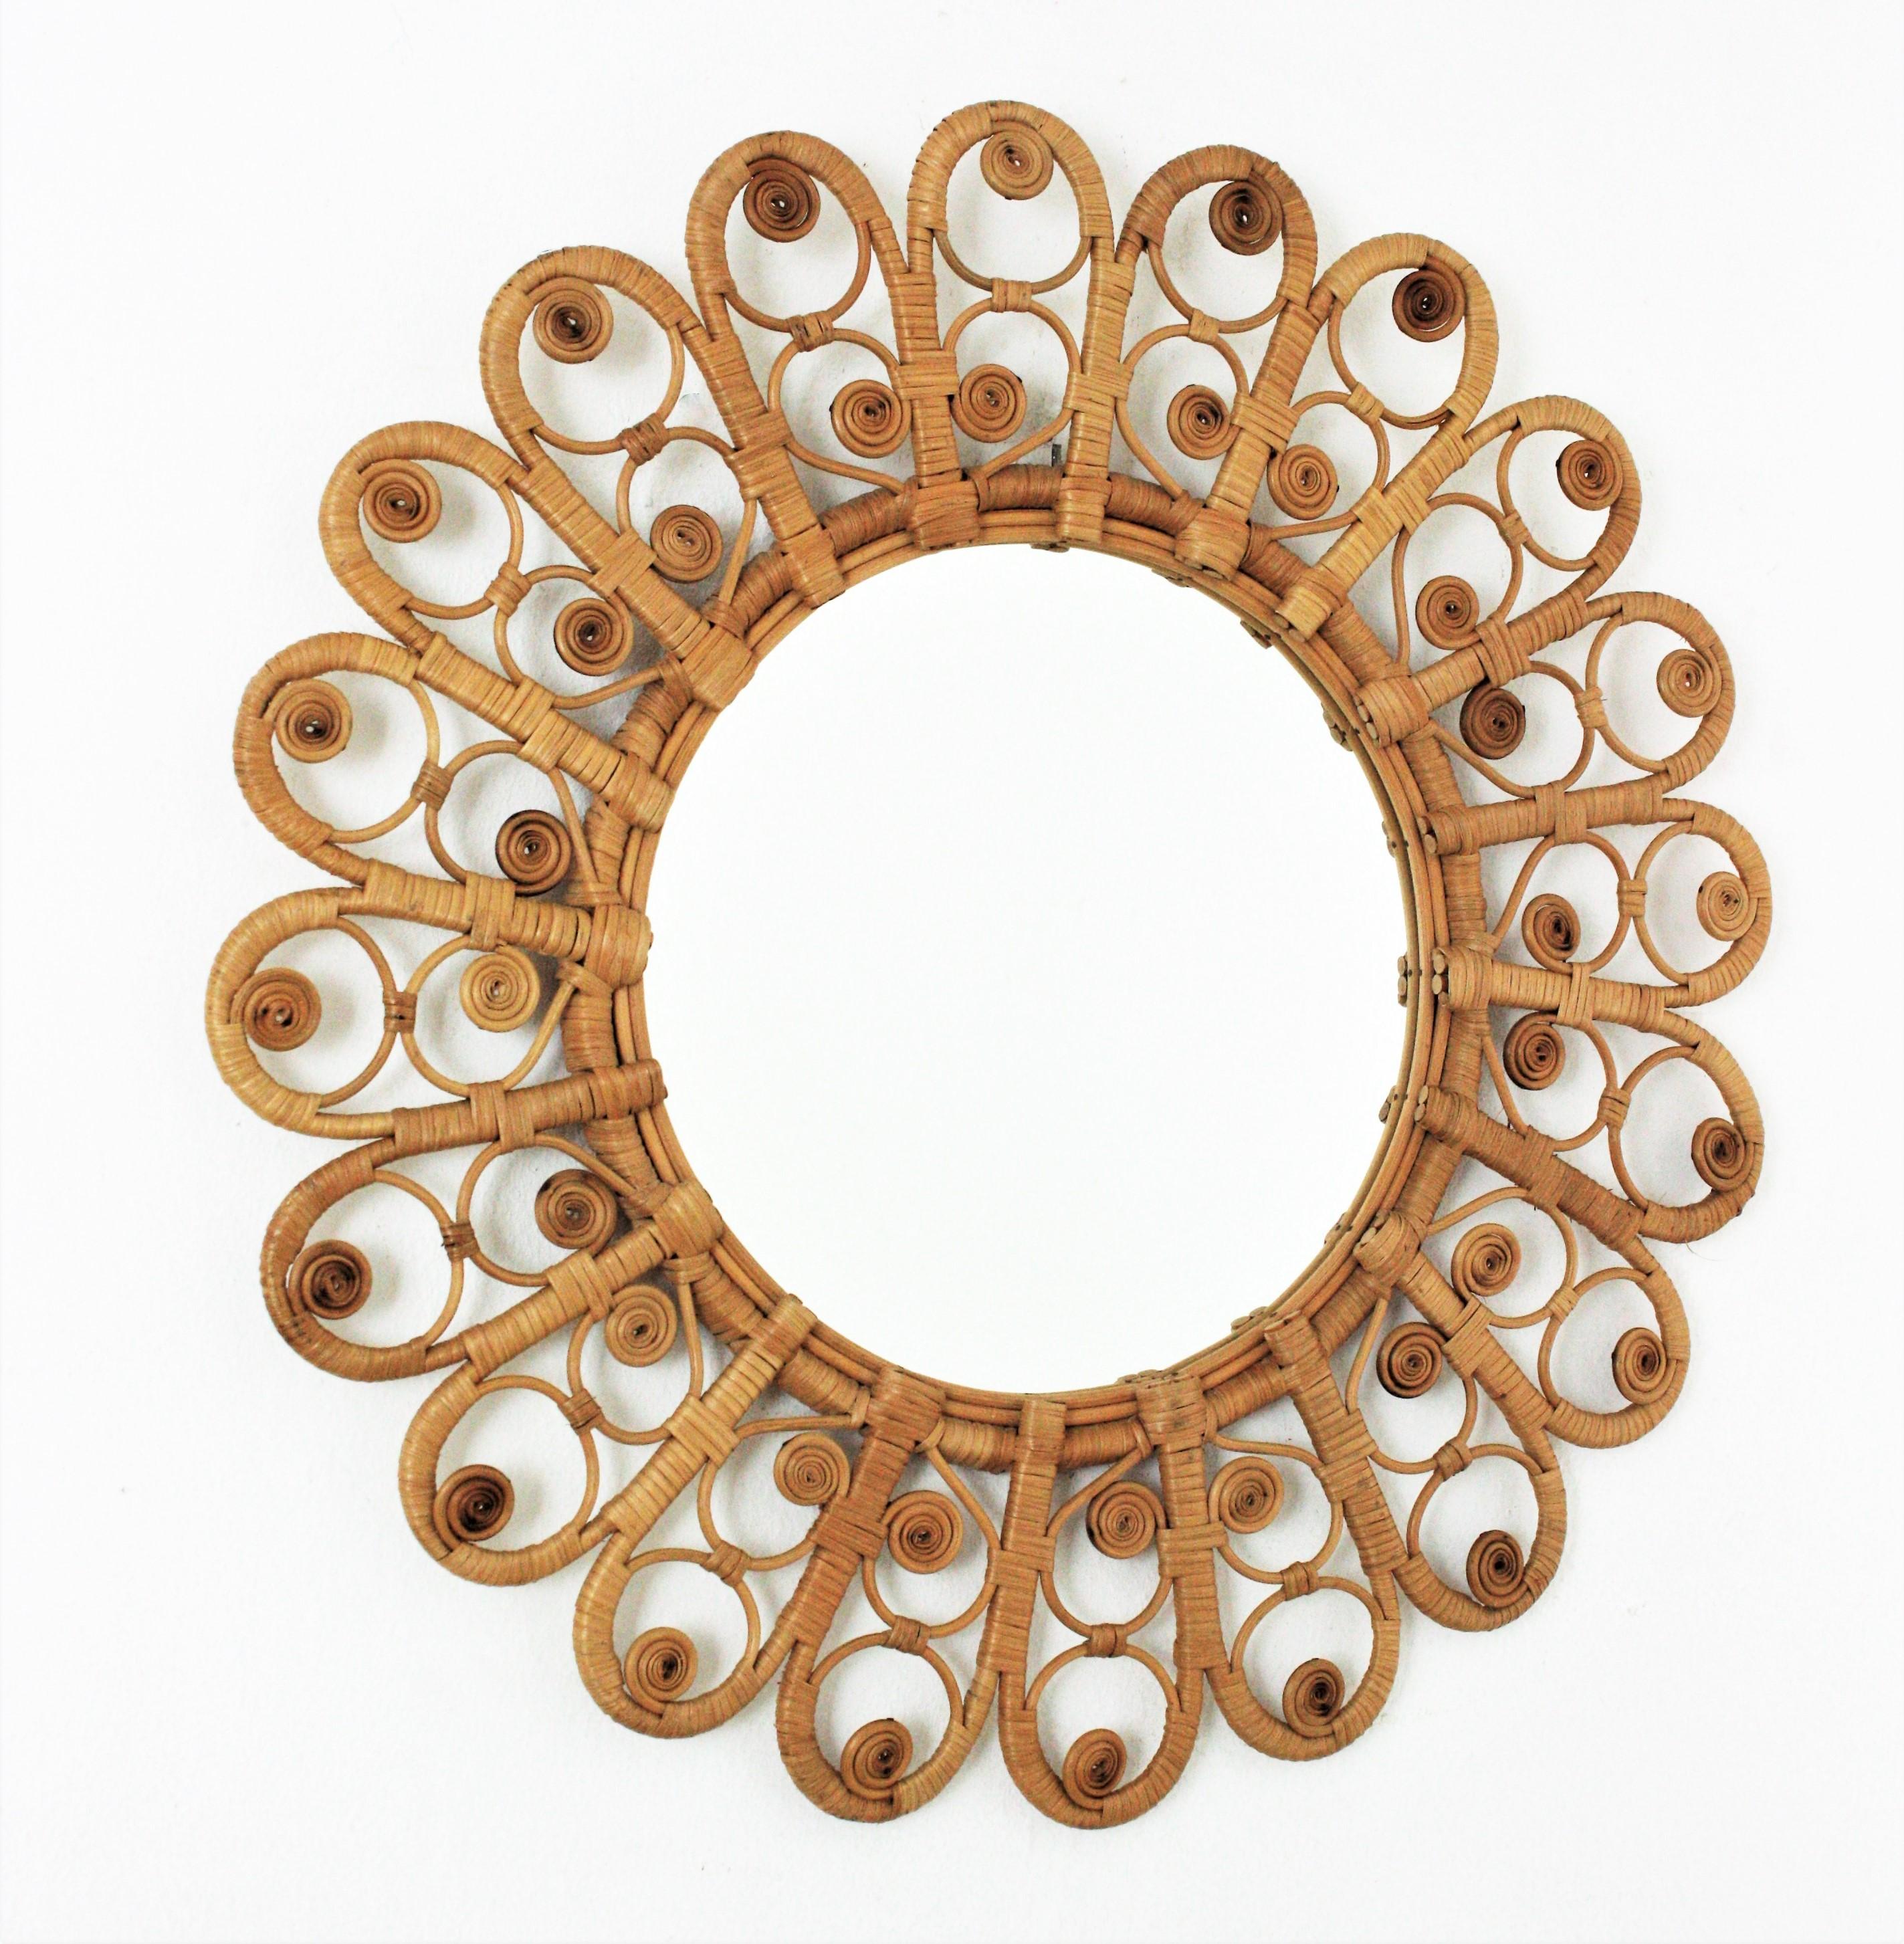 Handcrafte rattan sunburst flower mirror with peacok filigree frame. Spain, 1960s.
This mirror has all the taste of the Mediterranean and bohemian style and reminiscences in design of the Peacock chairs.
Manufactured in wicker and rattan with